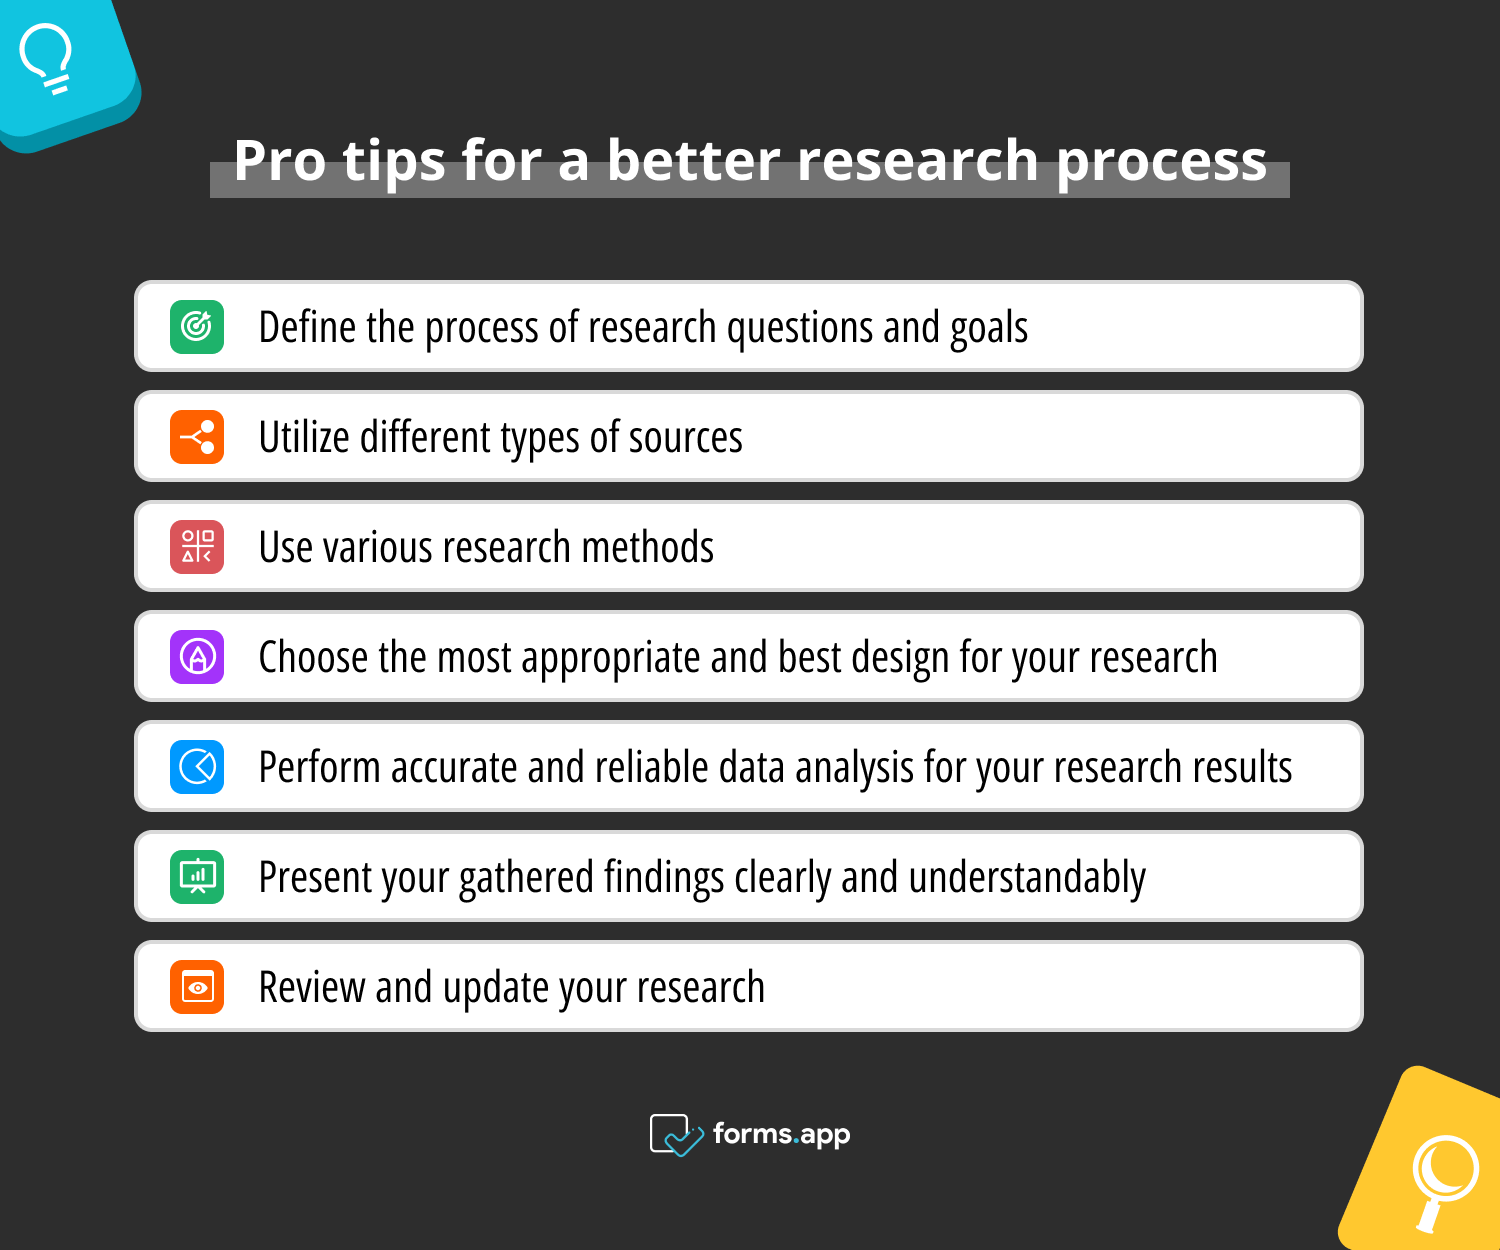 Tips to follow for a better research process